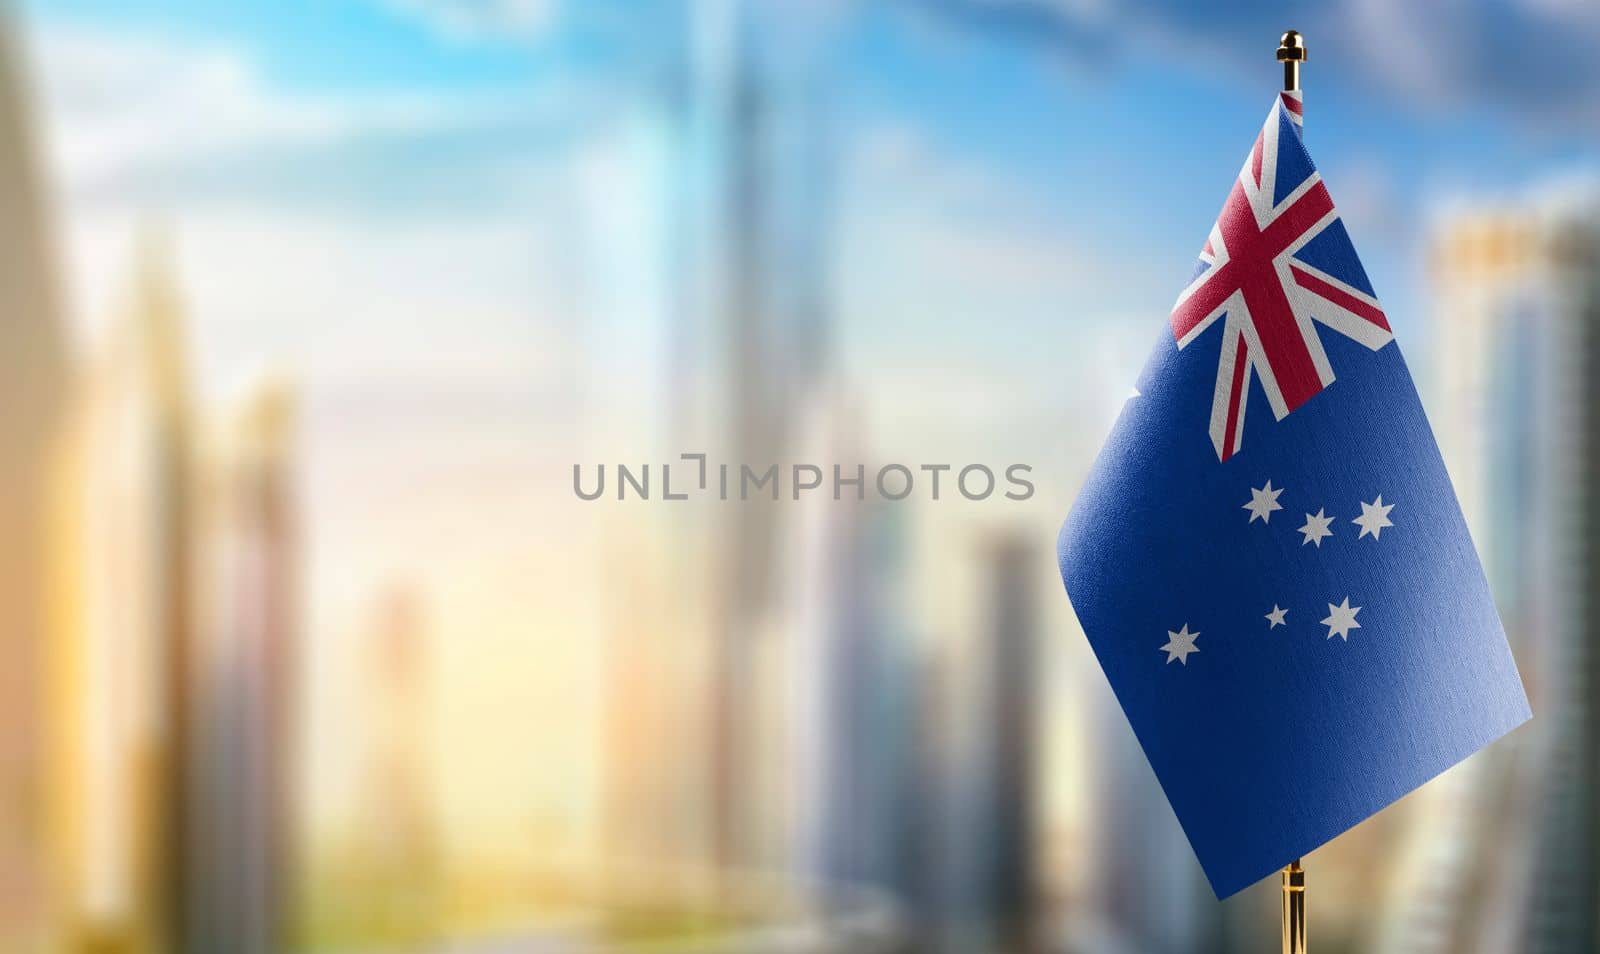 Small flags of the Australia on an abstract blurry background.